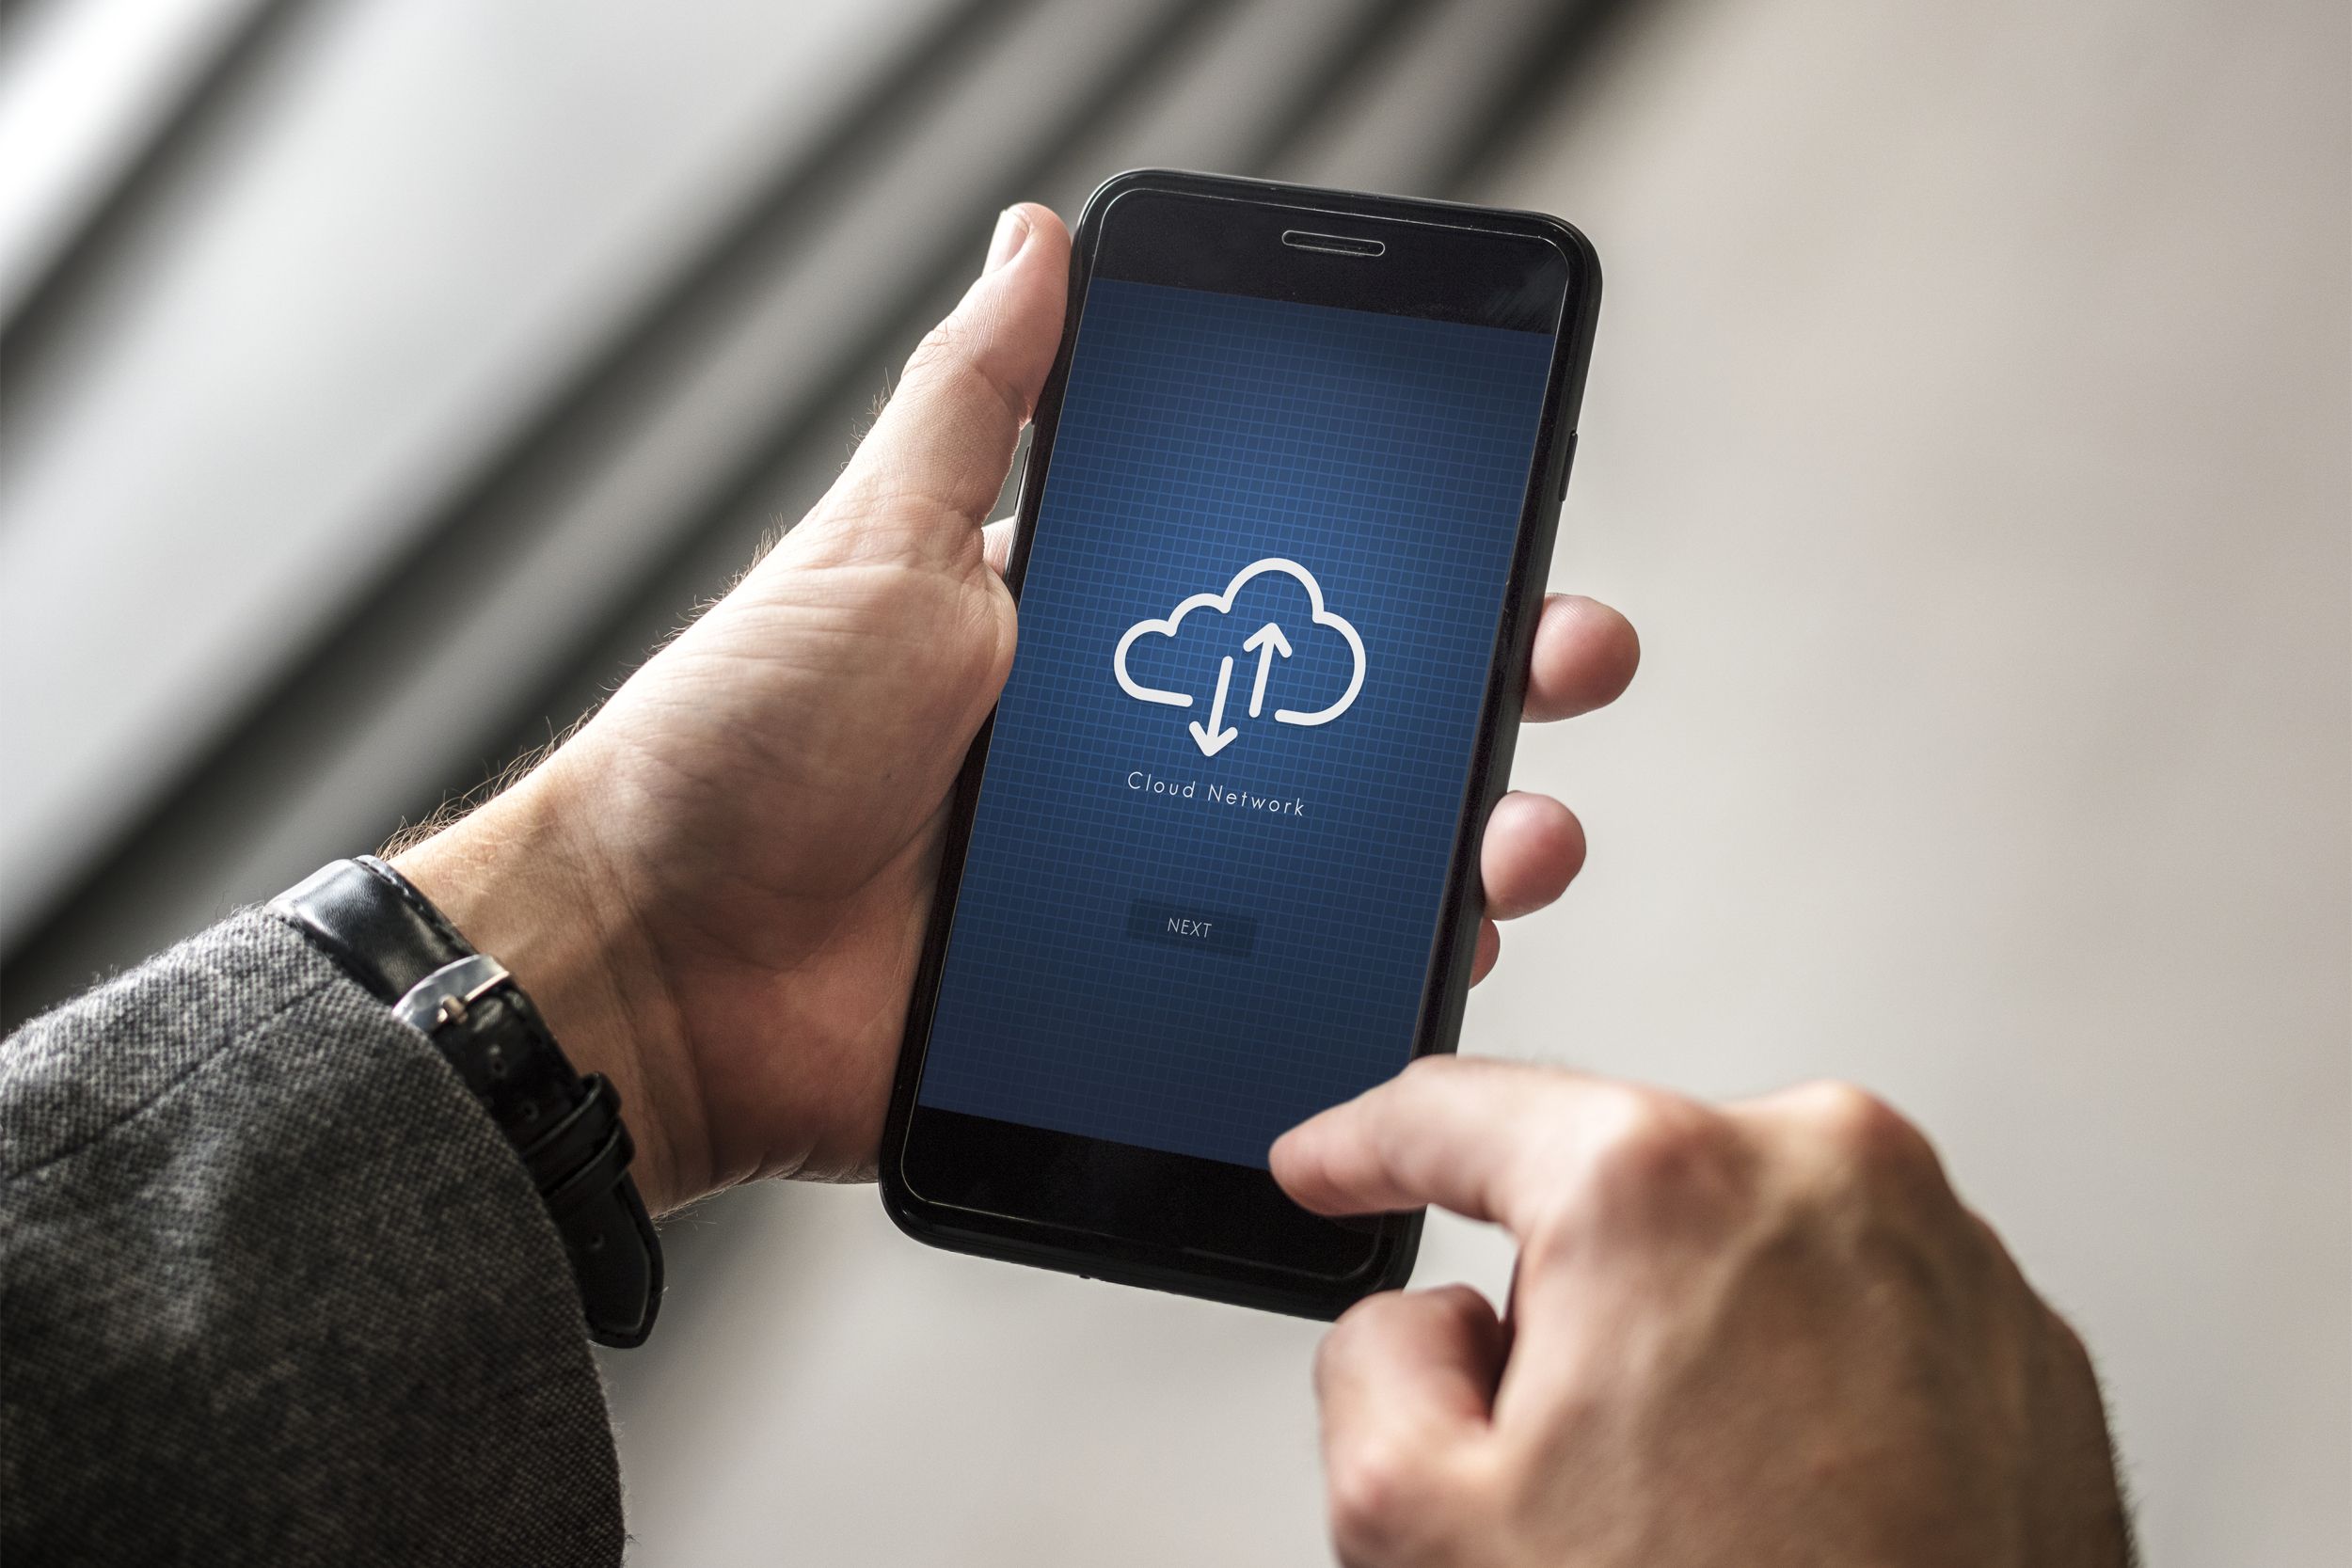 User accessing company data on mobile device via the cloud